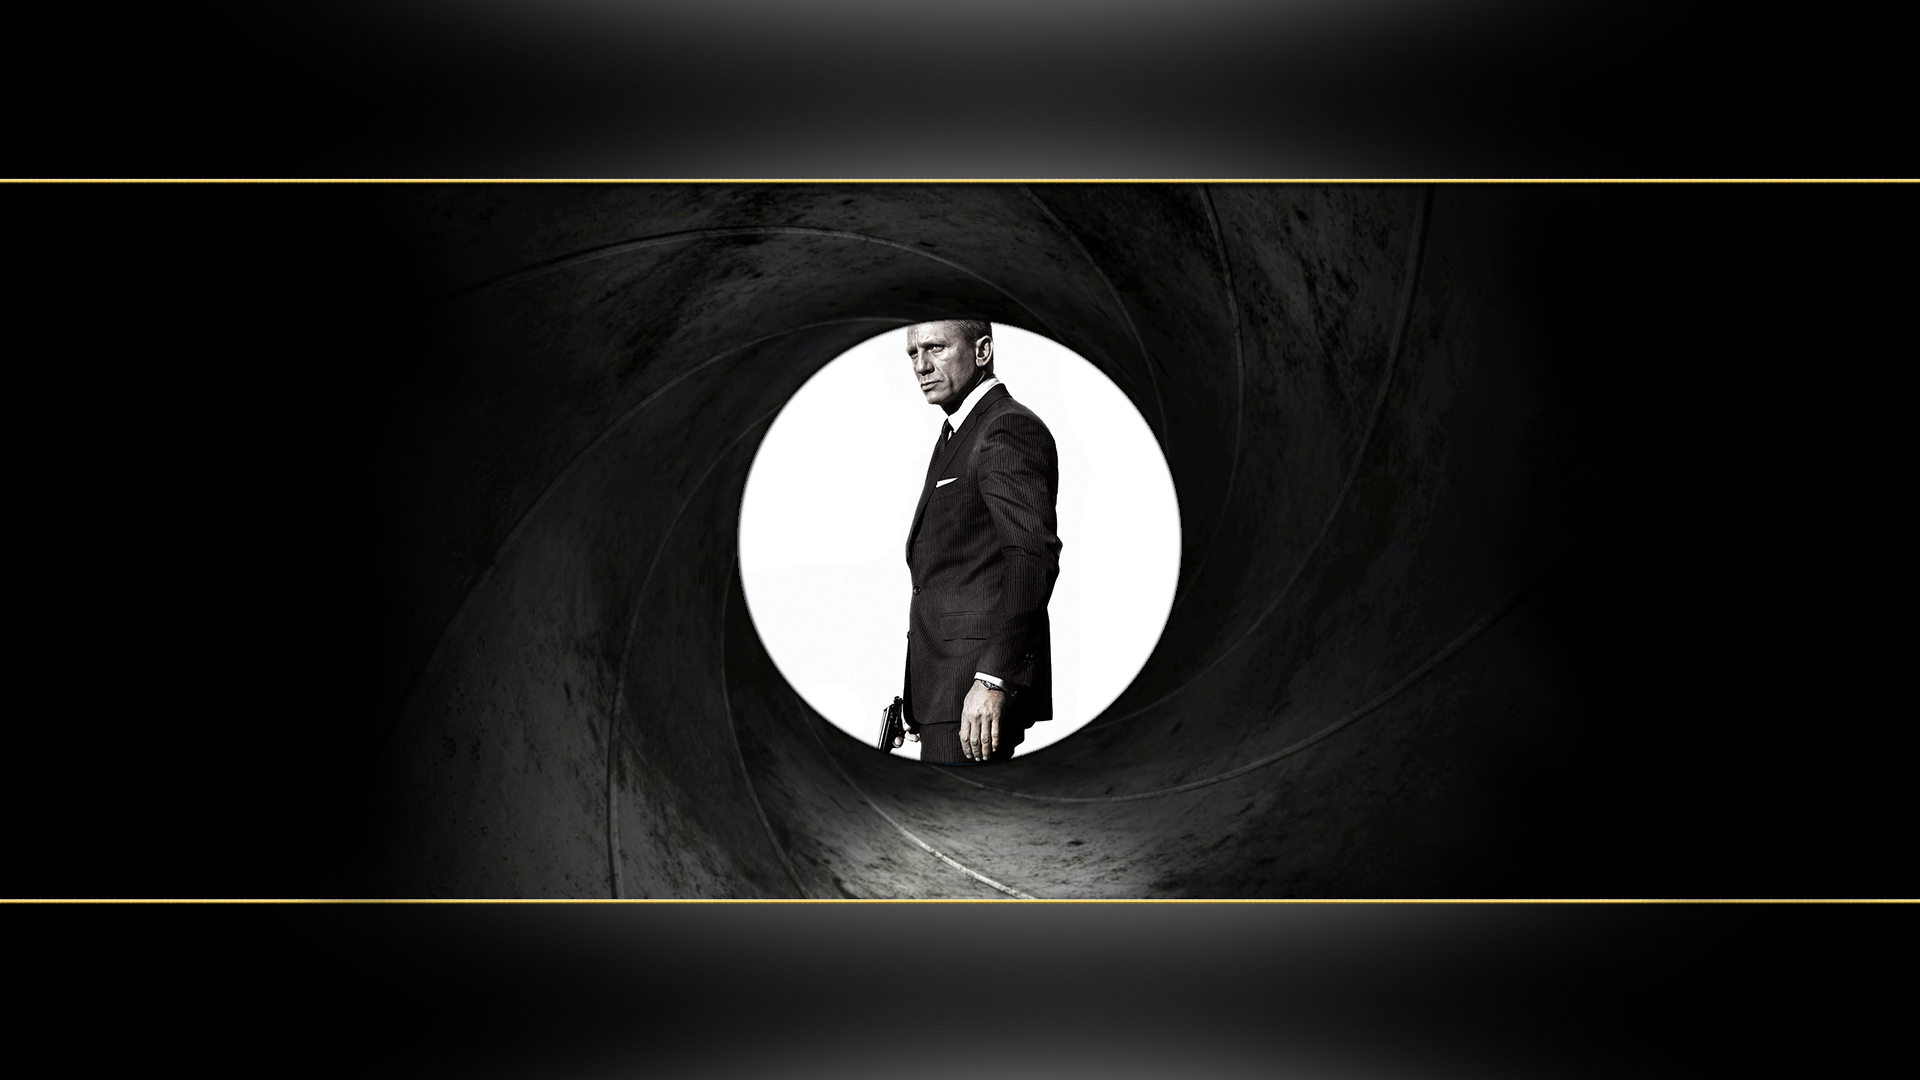 Movie Casino Royale HD Wallpaper | Background Image